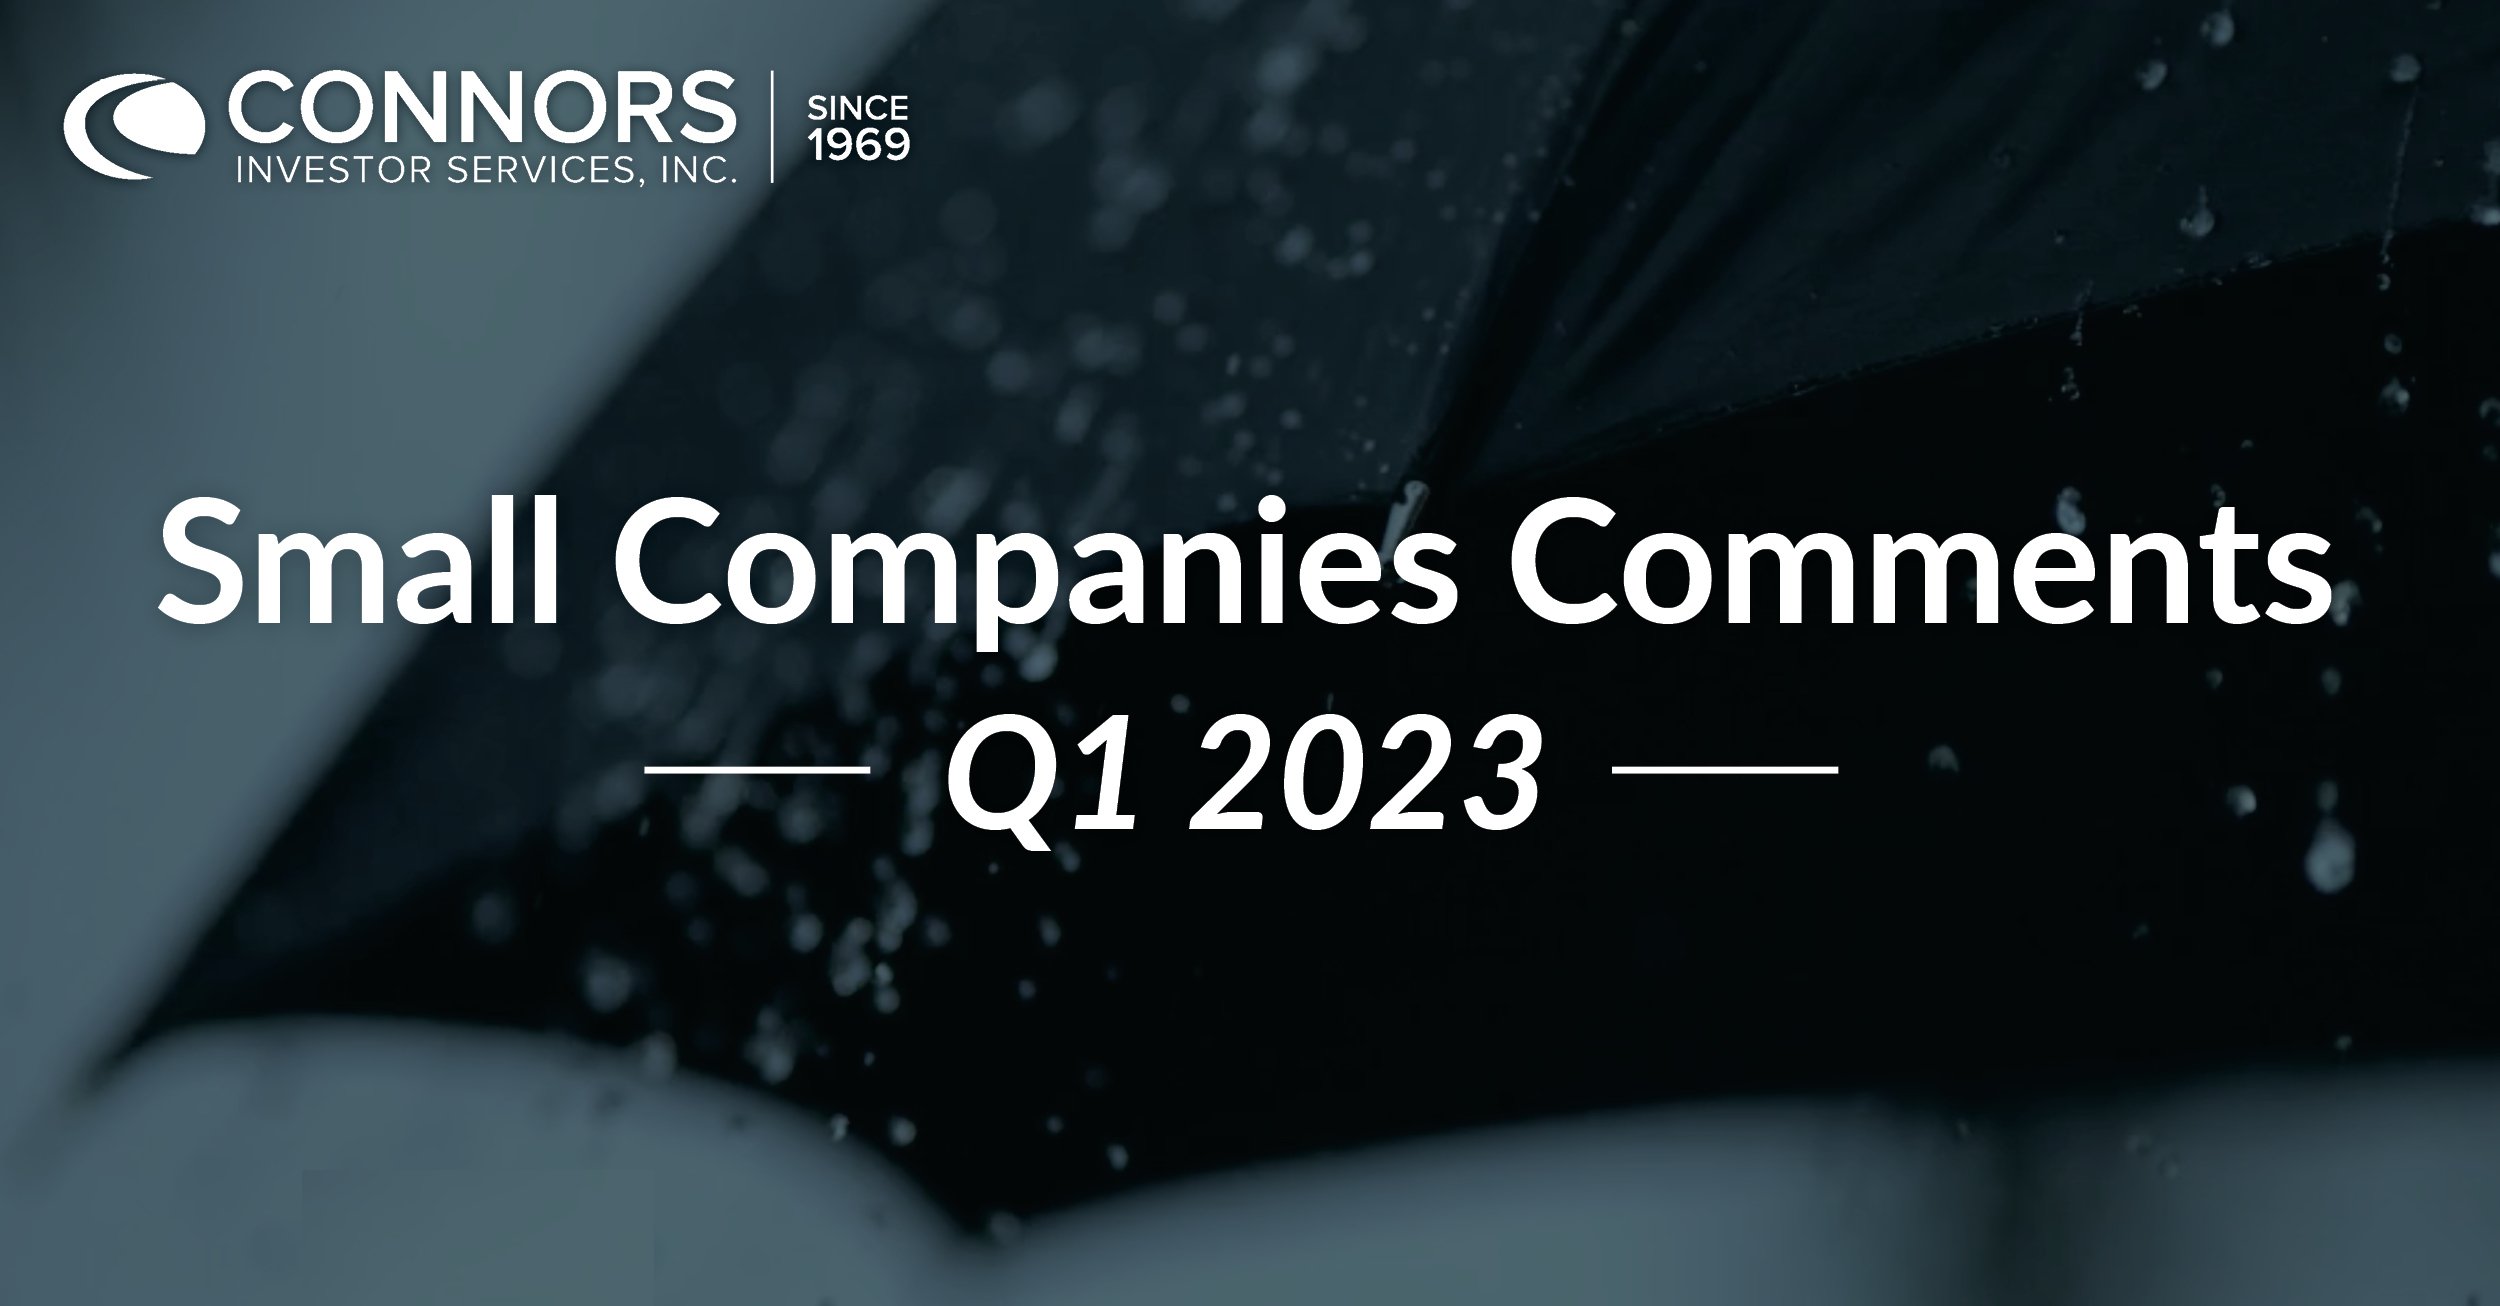 Q1 2023 Small Companies Comments